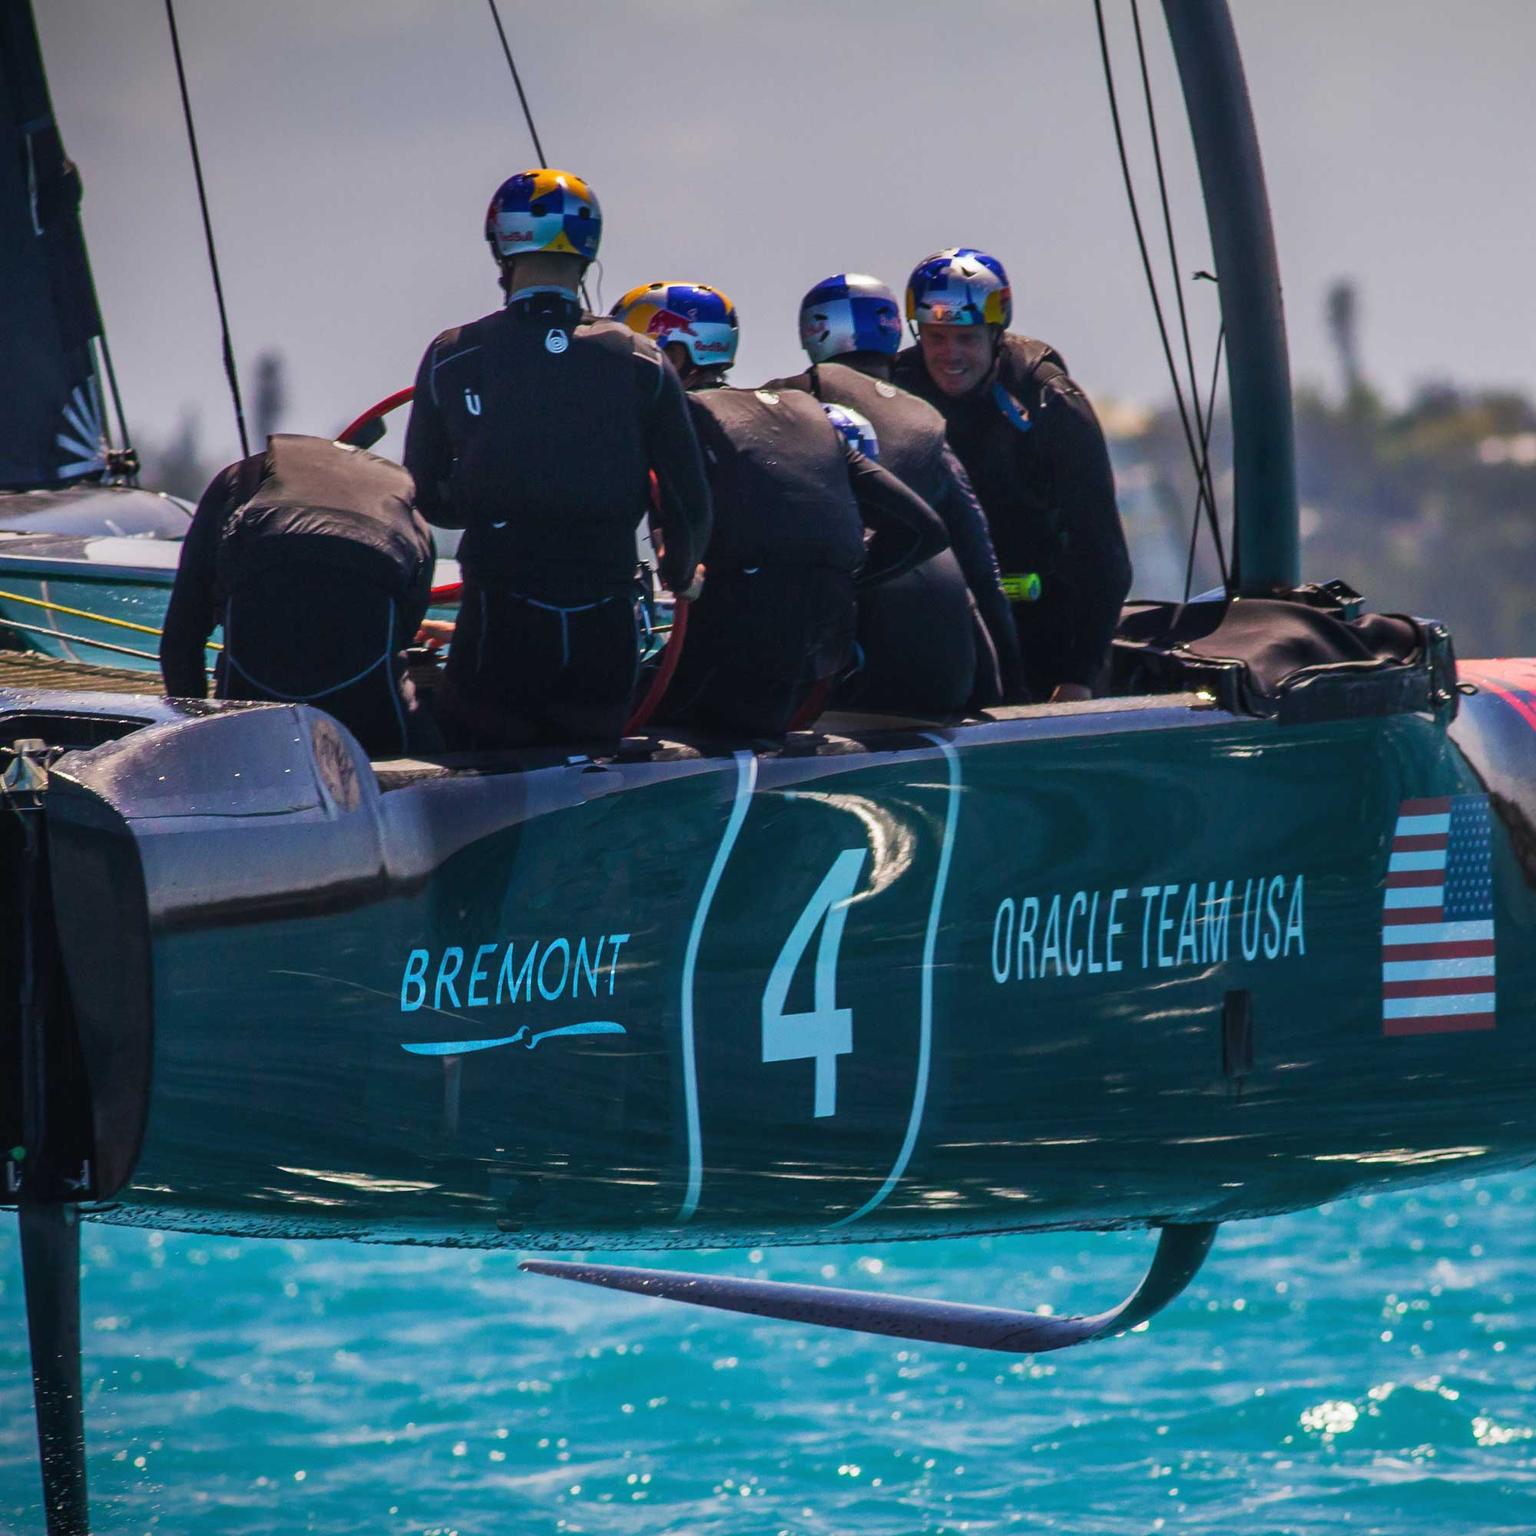 Bremont - official timing partner of ORACLE TEAM USA